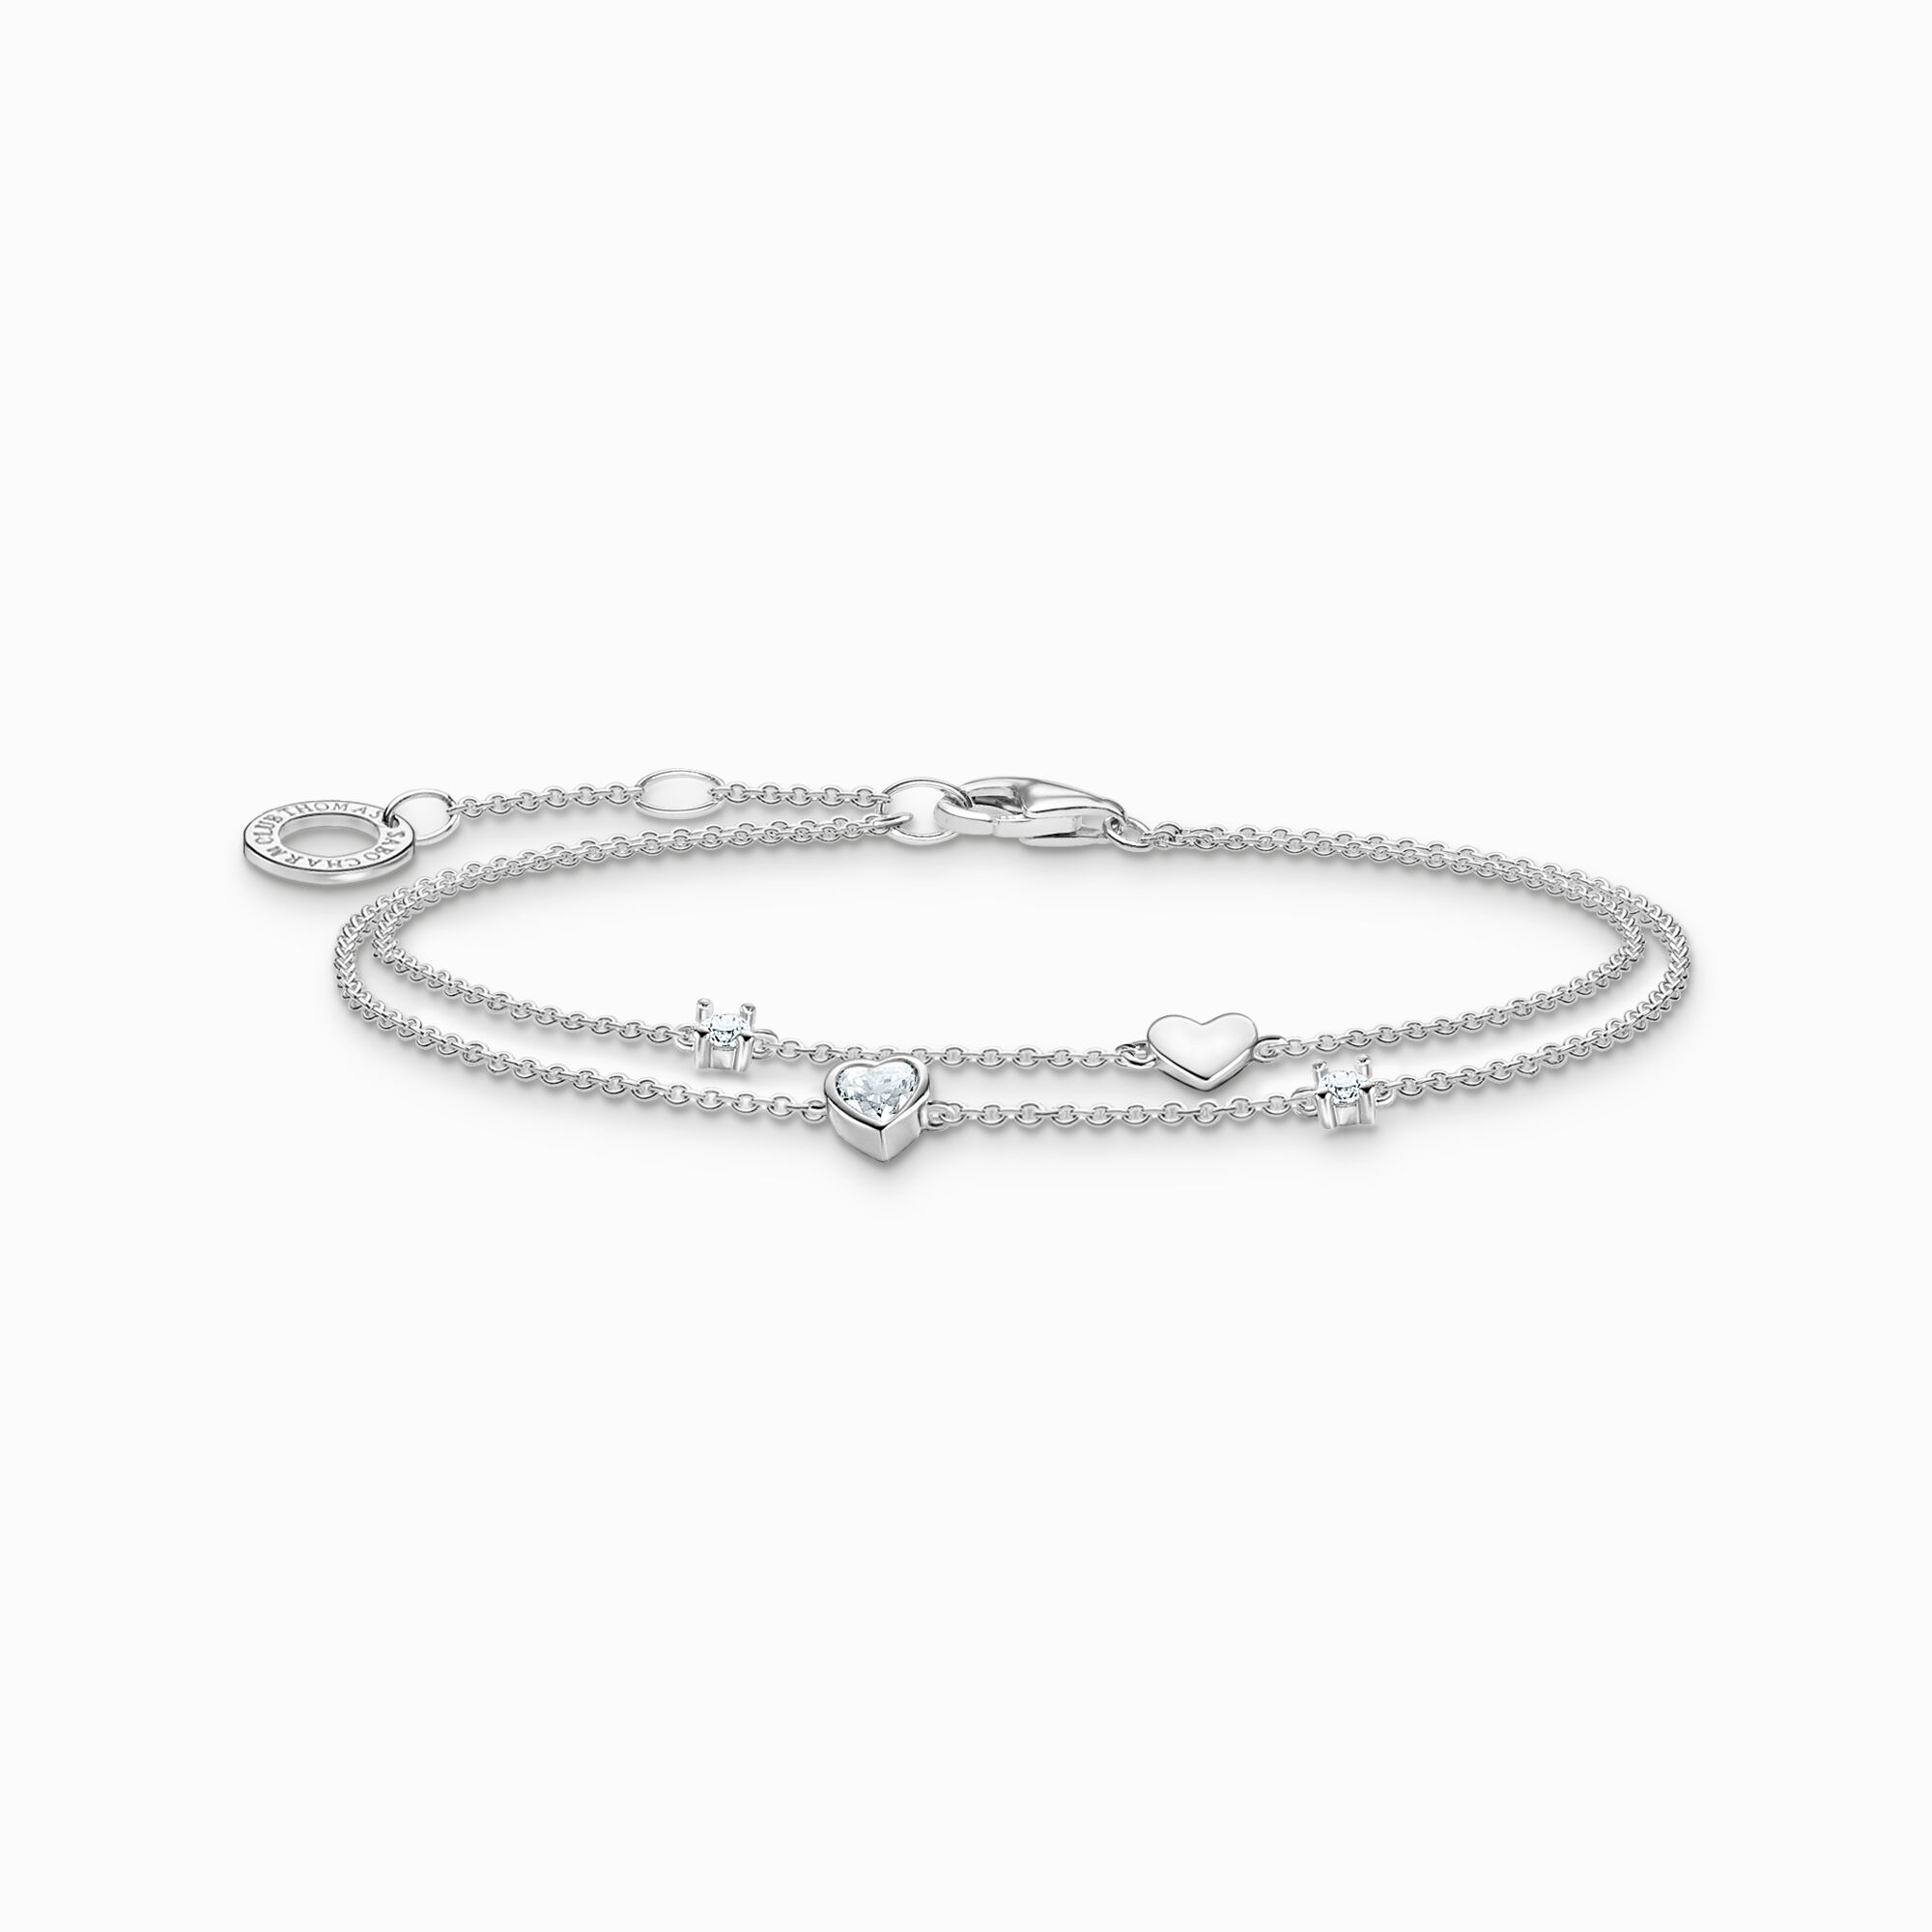 Bracelet with hearts and white stones silver from the Charming Collection collection in the THOMAS SABO online store